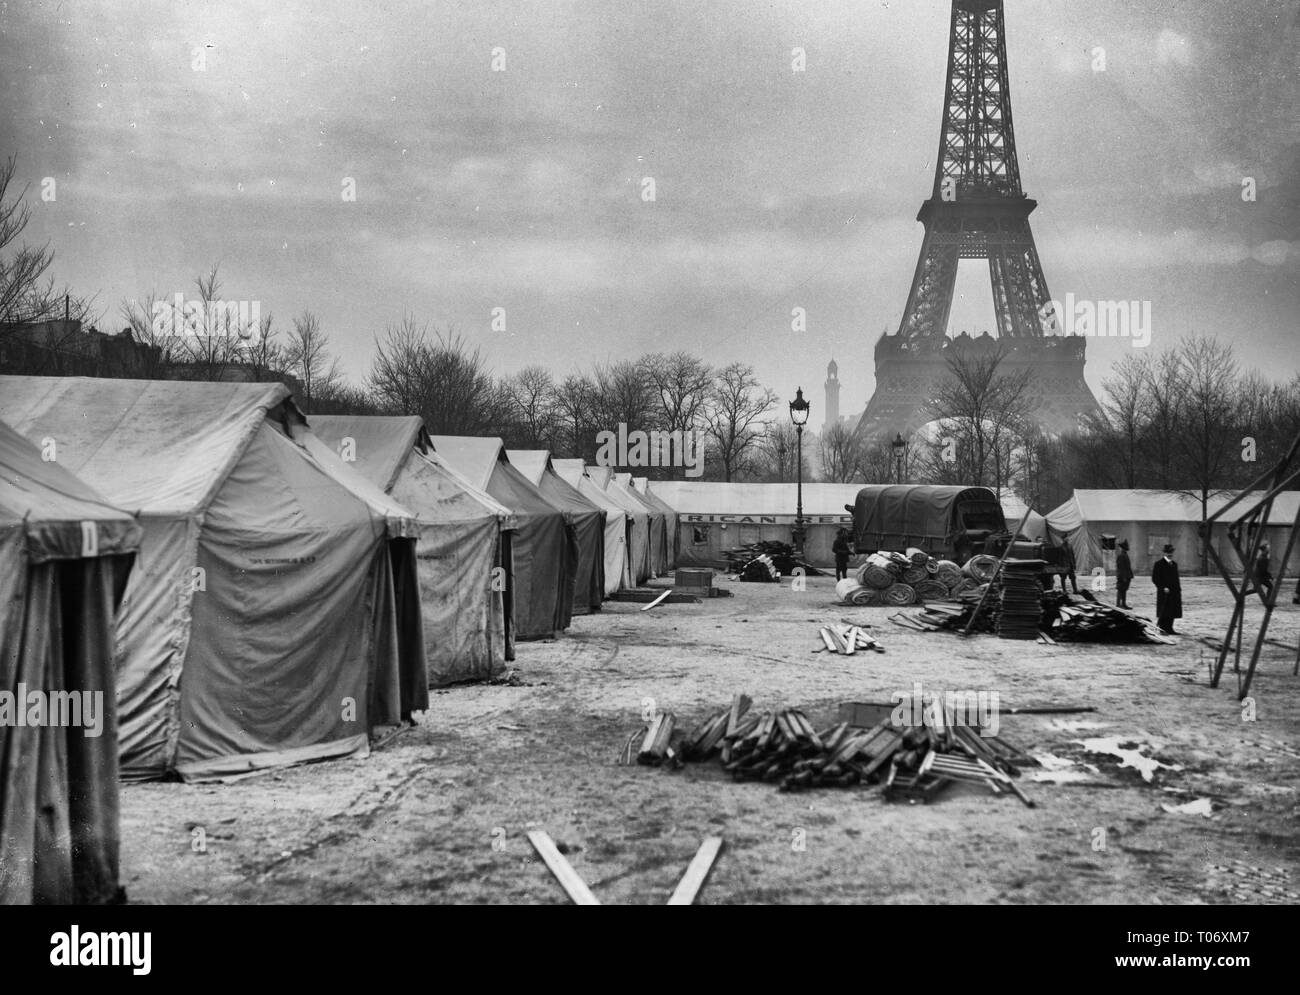 Paris, France. The American Red Cross Enlisted Men's Hotel #13, at Champ de Mars, Paris, in the course of construction. Made entirely out of salvaged tents, there are accomodations for 1,400 men. A fully equipped canteen and recreation hut go to make this hostely complete. The work was started on February, 18th and finished in nine days. It was necessary for the Red Cross to provide sleeping places quickly, for the men, passing through Paris, were coming in great crowds. In the shadow of the Eiffel Tower, it is indeed an ideal site for the purpose. February, 1919 Stock Photo